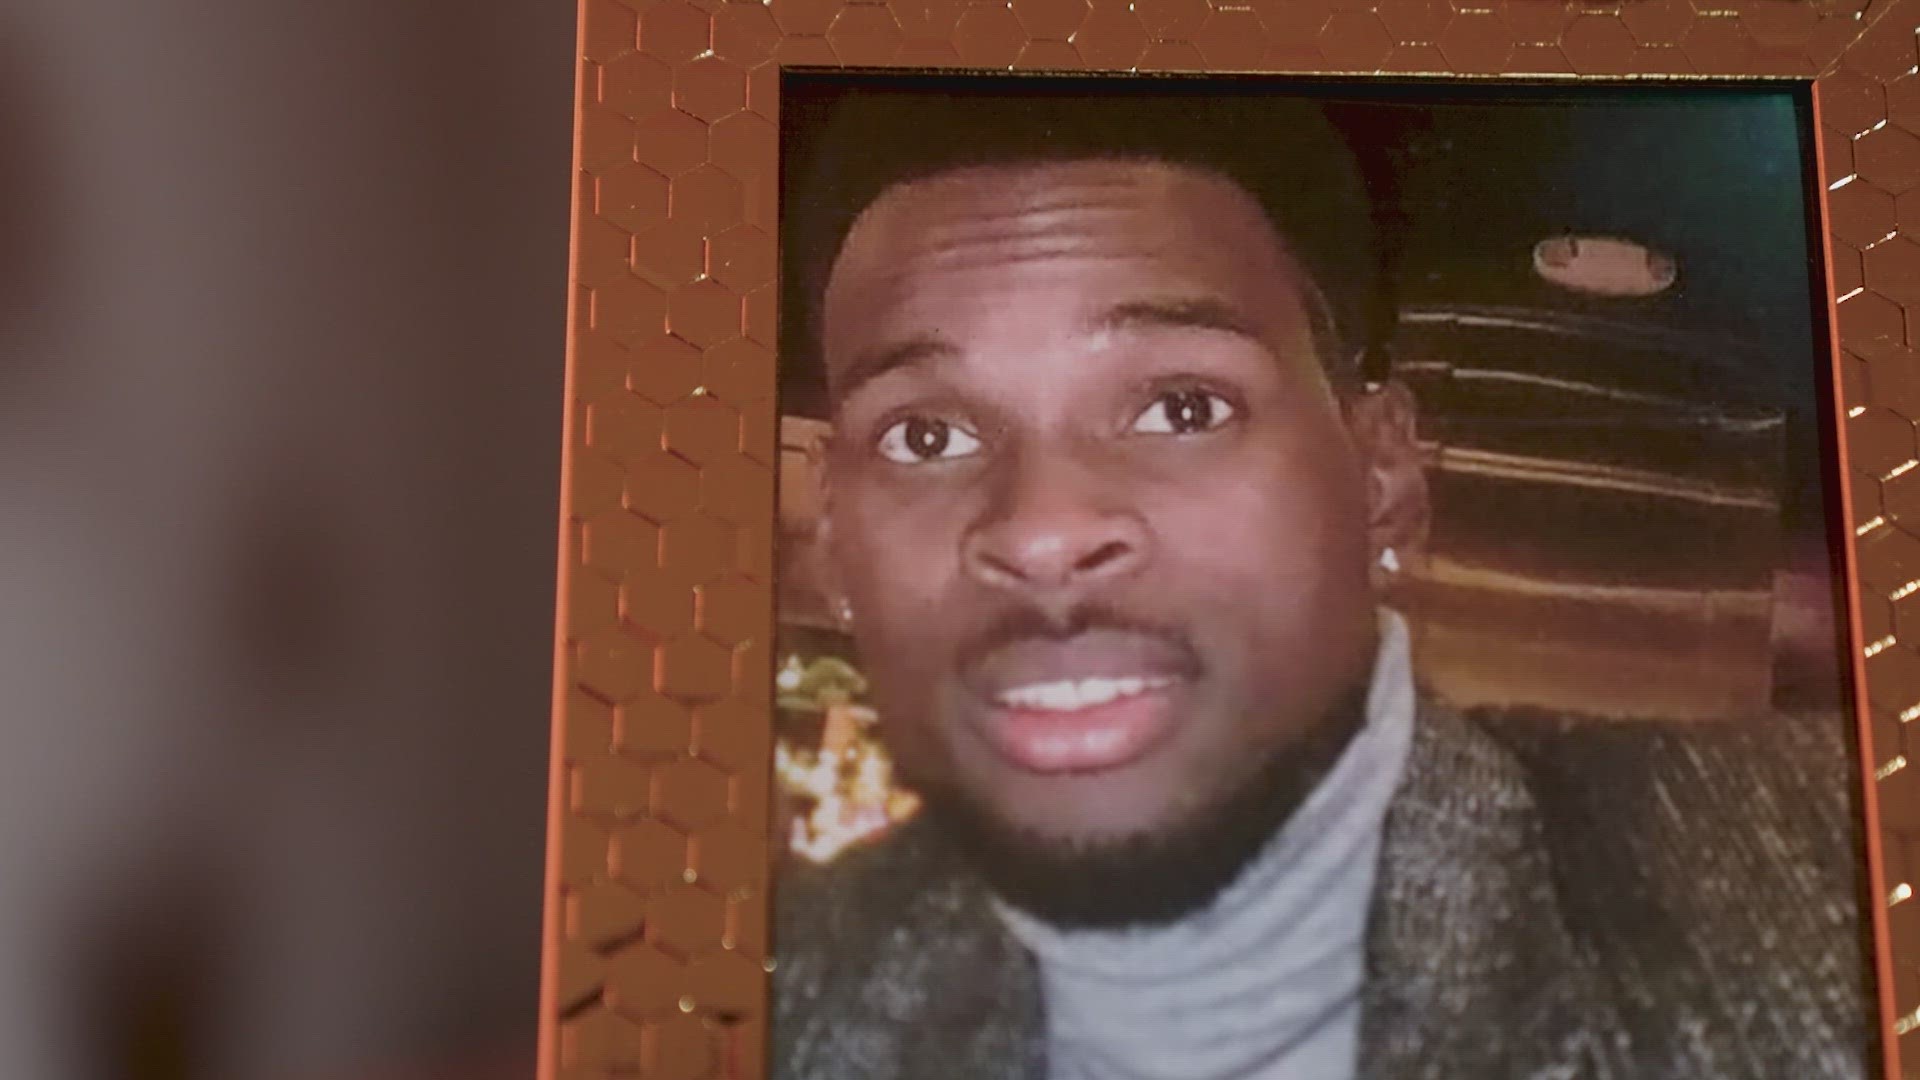 Denzel Branch, 31, was a youth pastor at New Generation Church in Dallas.